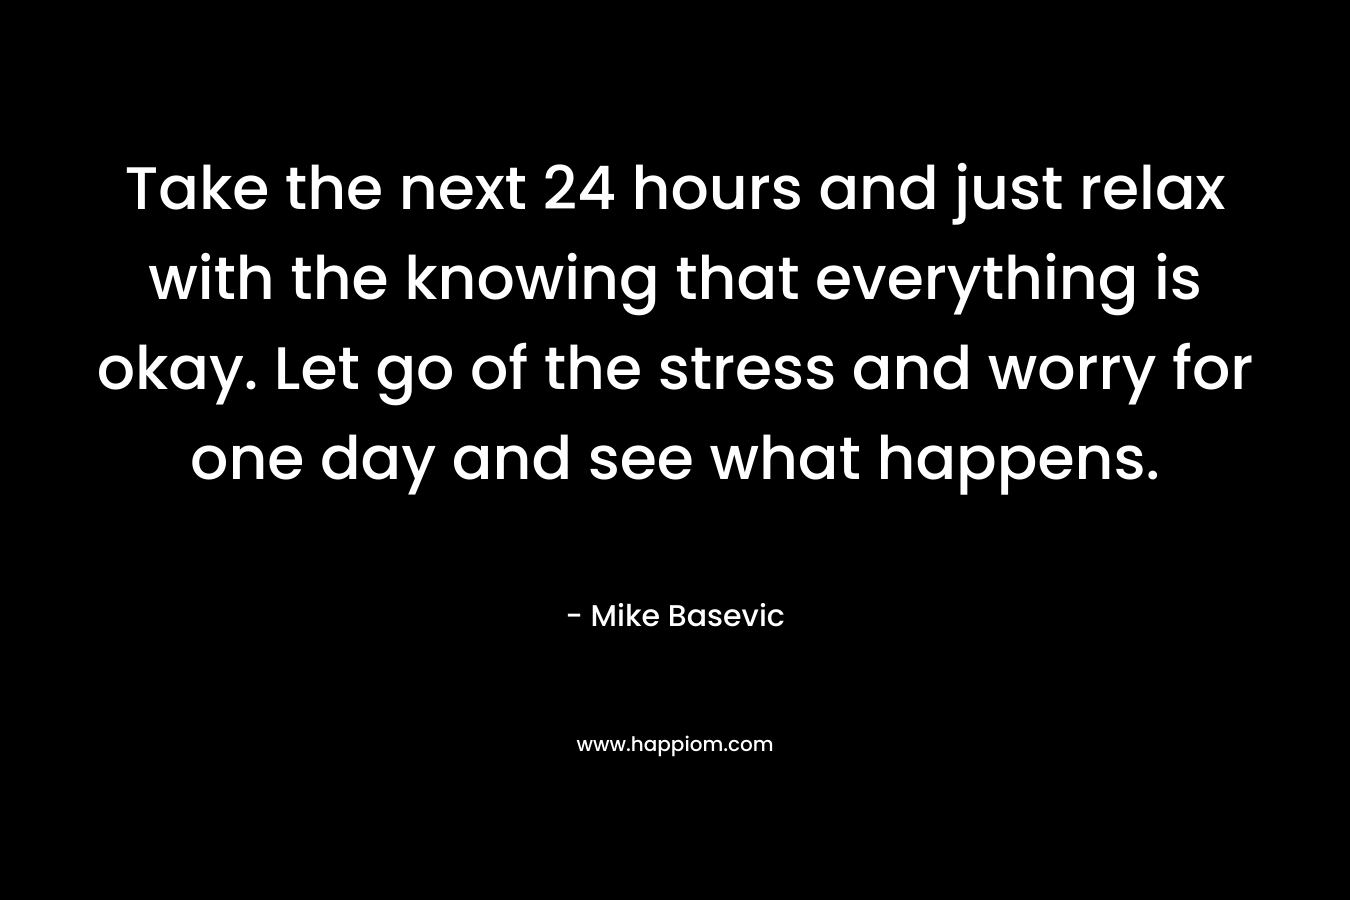 Take the next 24 hours and just relax with the knowing that everything is okay. Let go of the stress and worry for one day and see what happens. – Mike Basevic